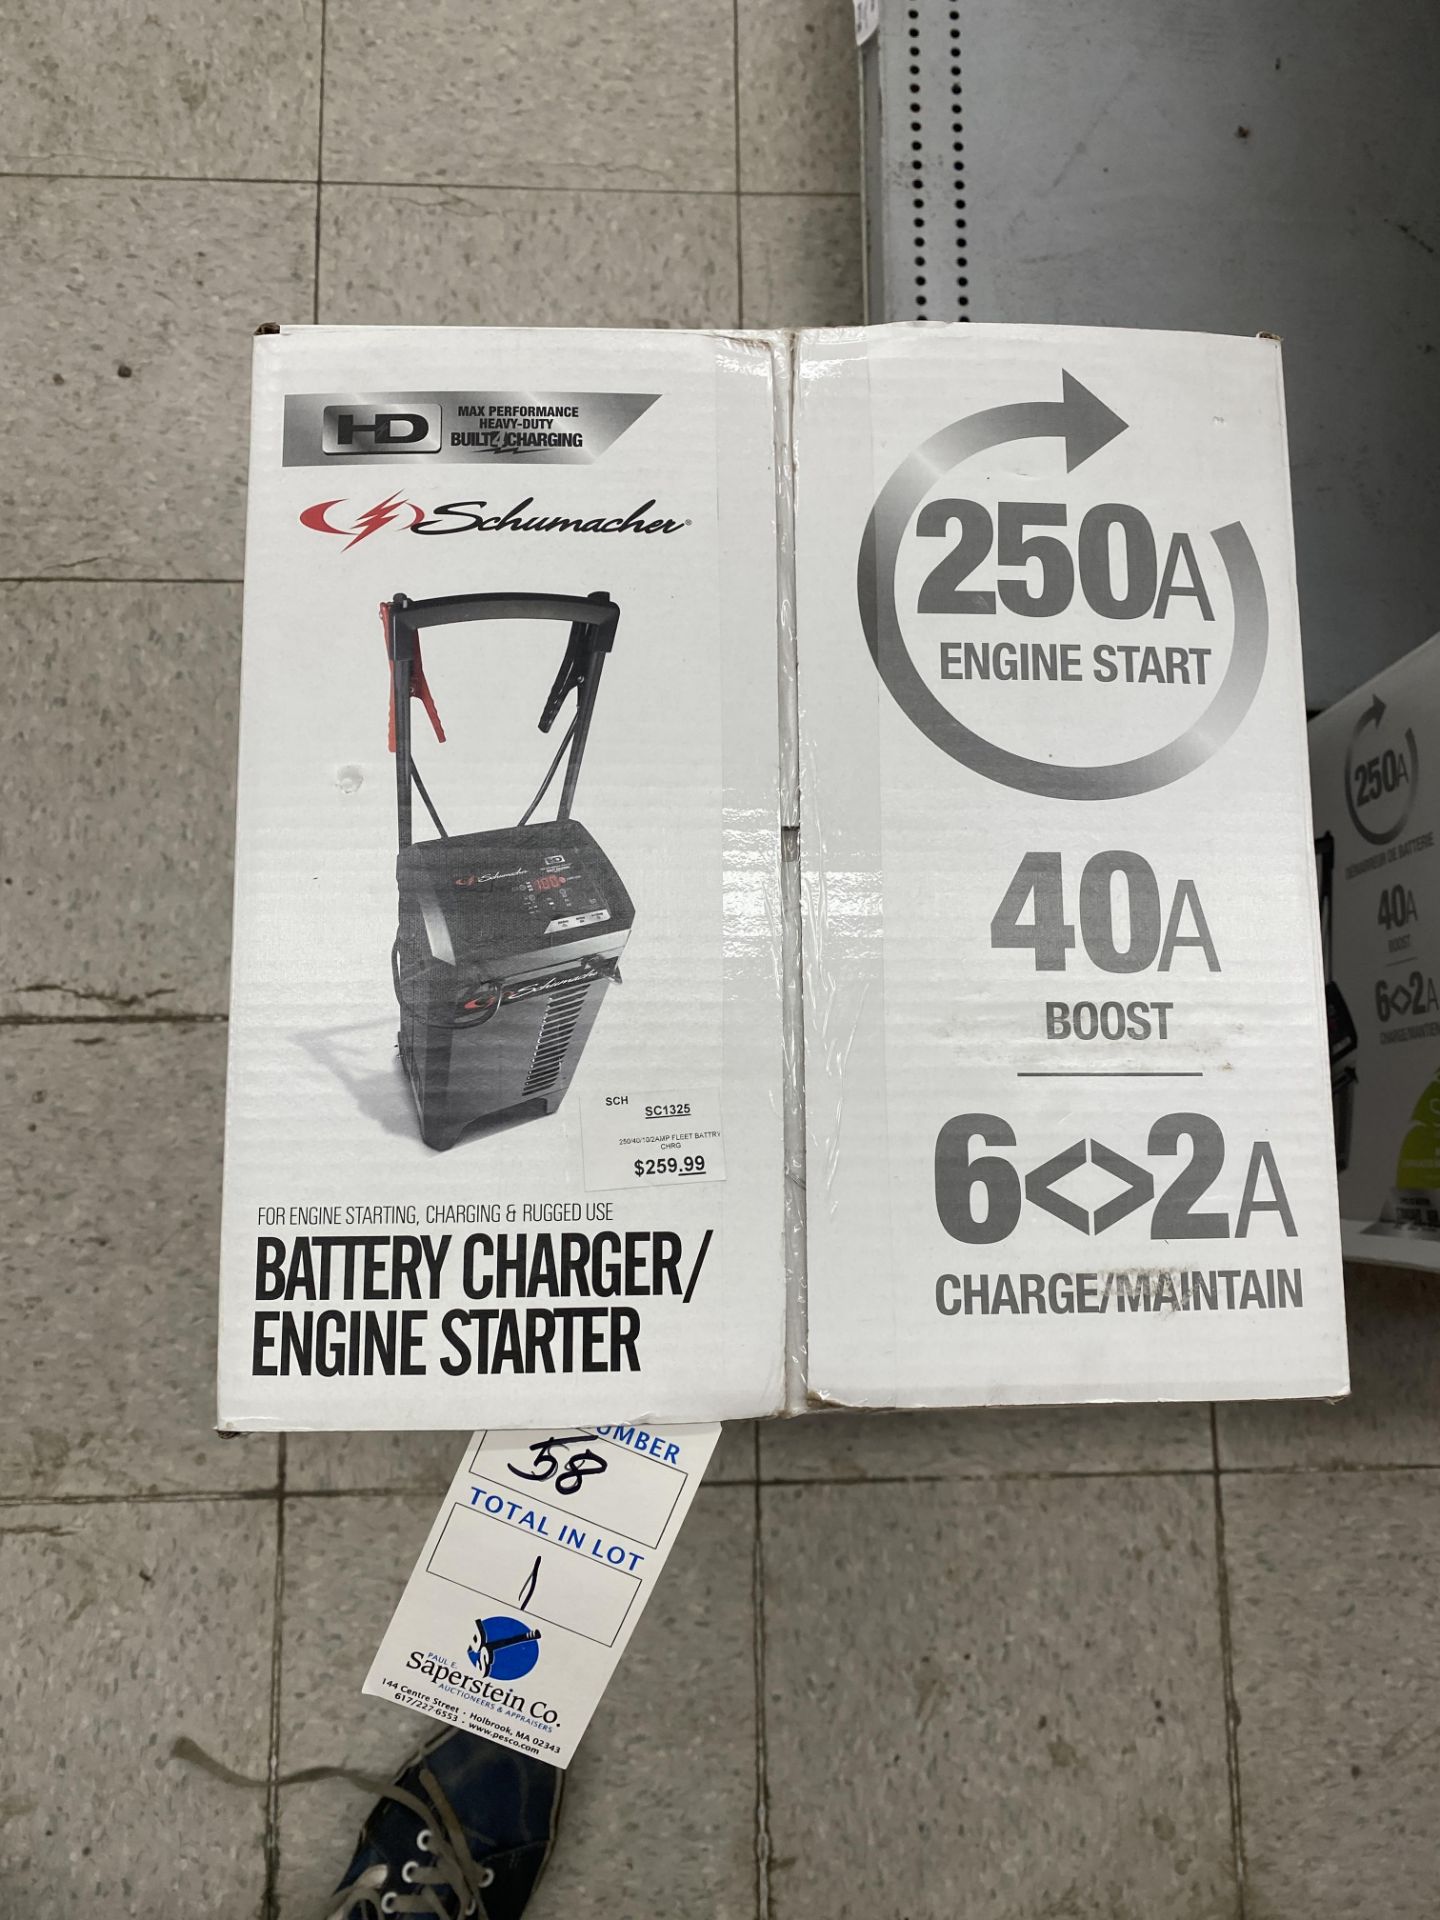 HD 12v Battery Charger and Engine Starter - Image 2 of 2